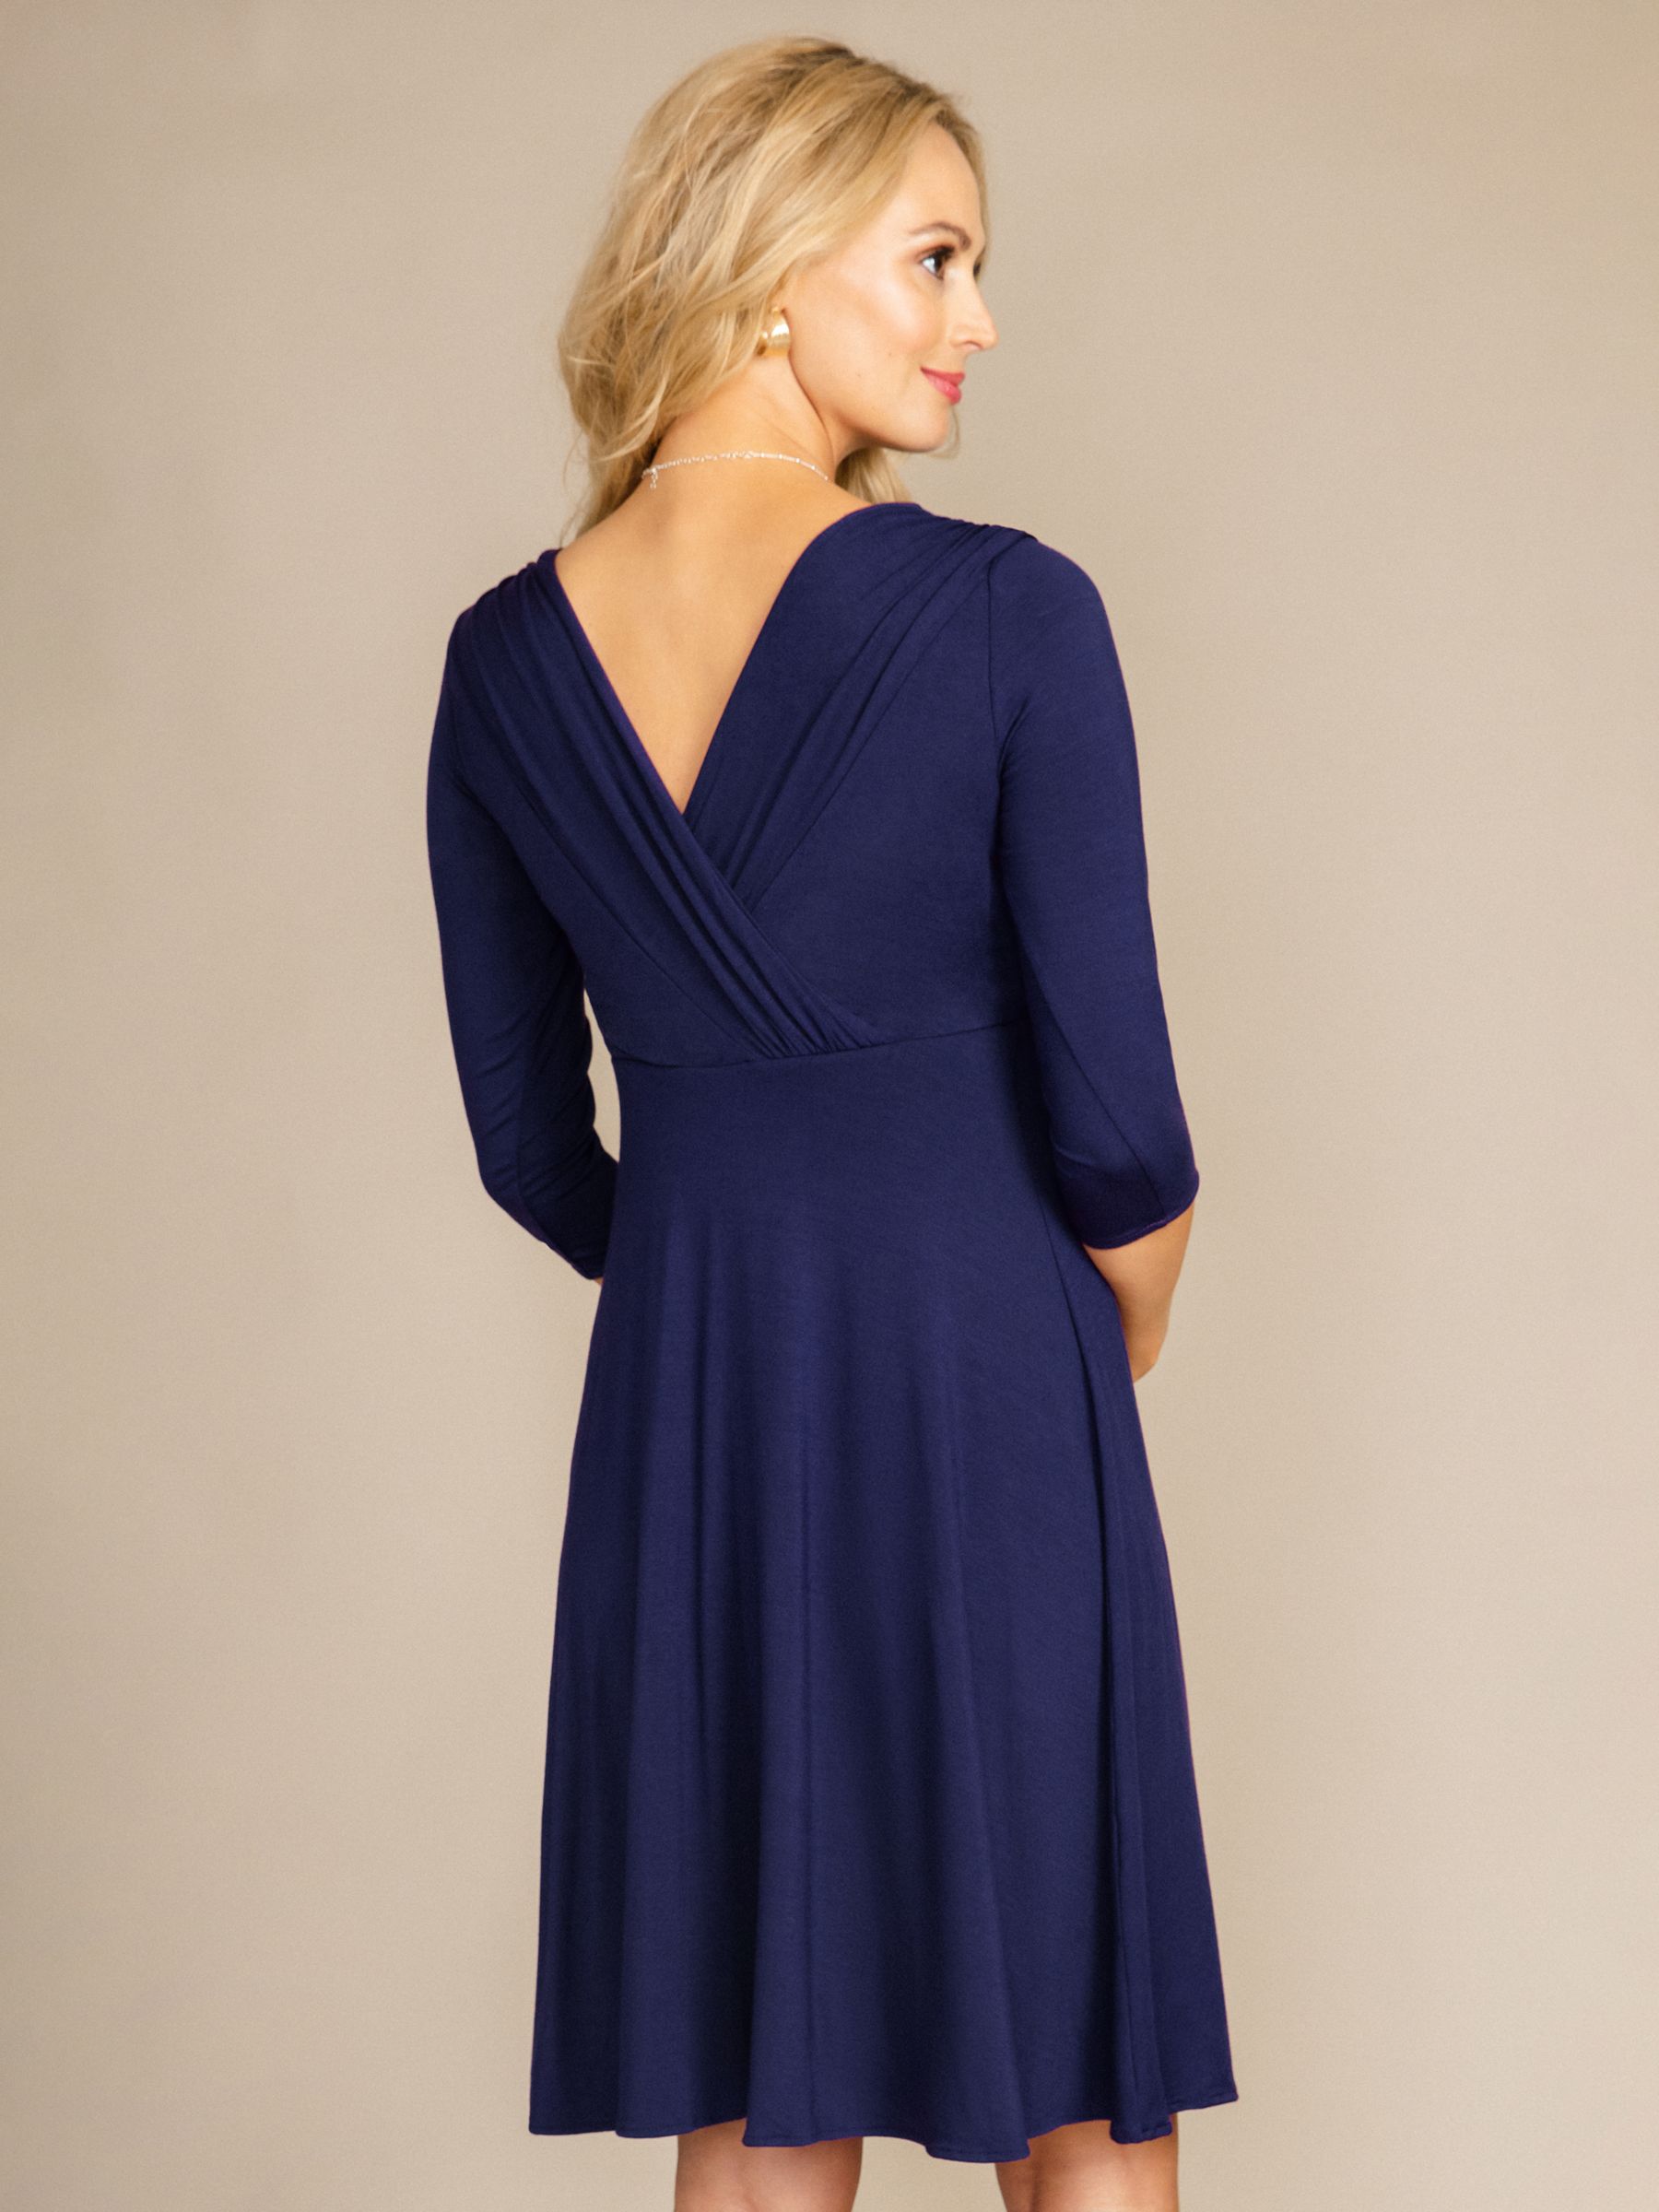 Tiffany Rose Willow Maternity Dress, Eclipse Blue at John Lewis